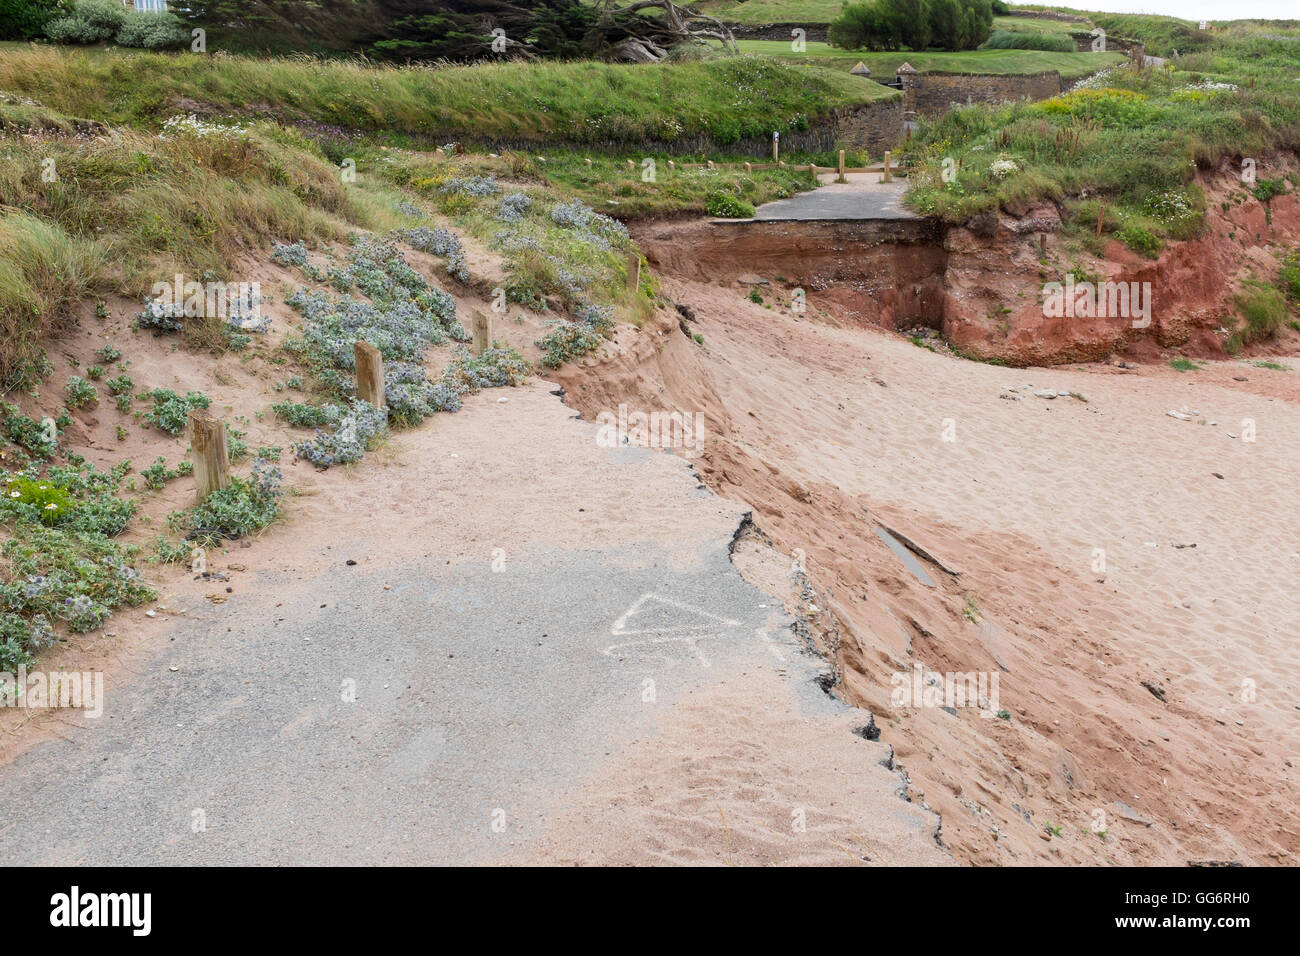 Collapsed road caused by coastal erosion on the South Devon coastline Stock Photo